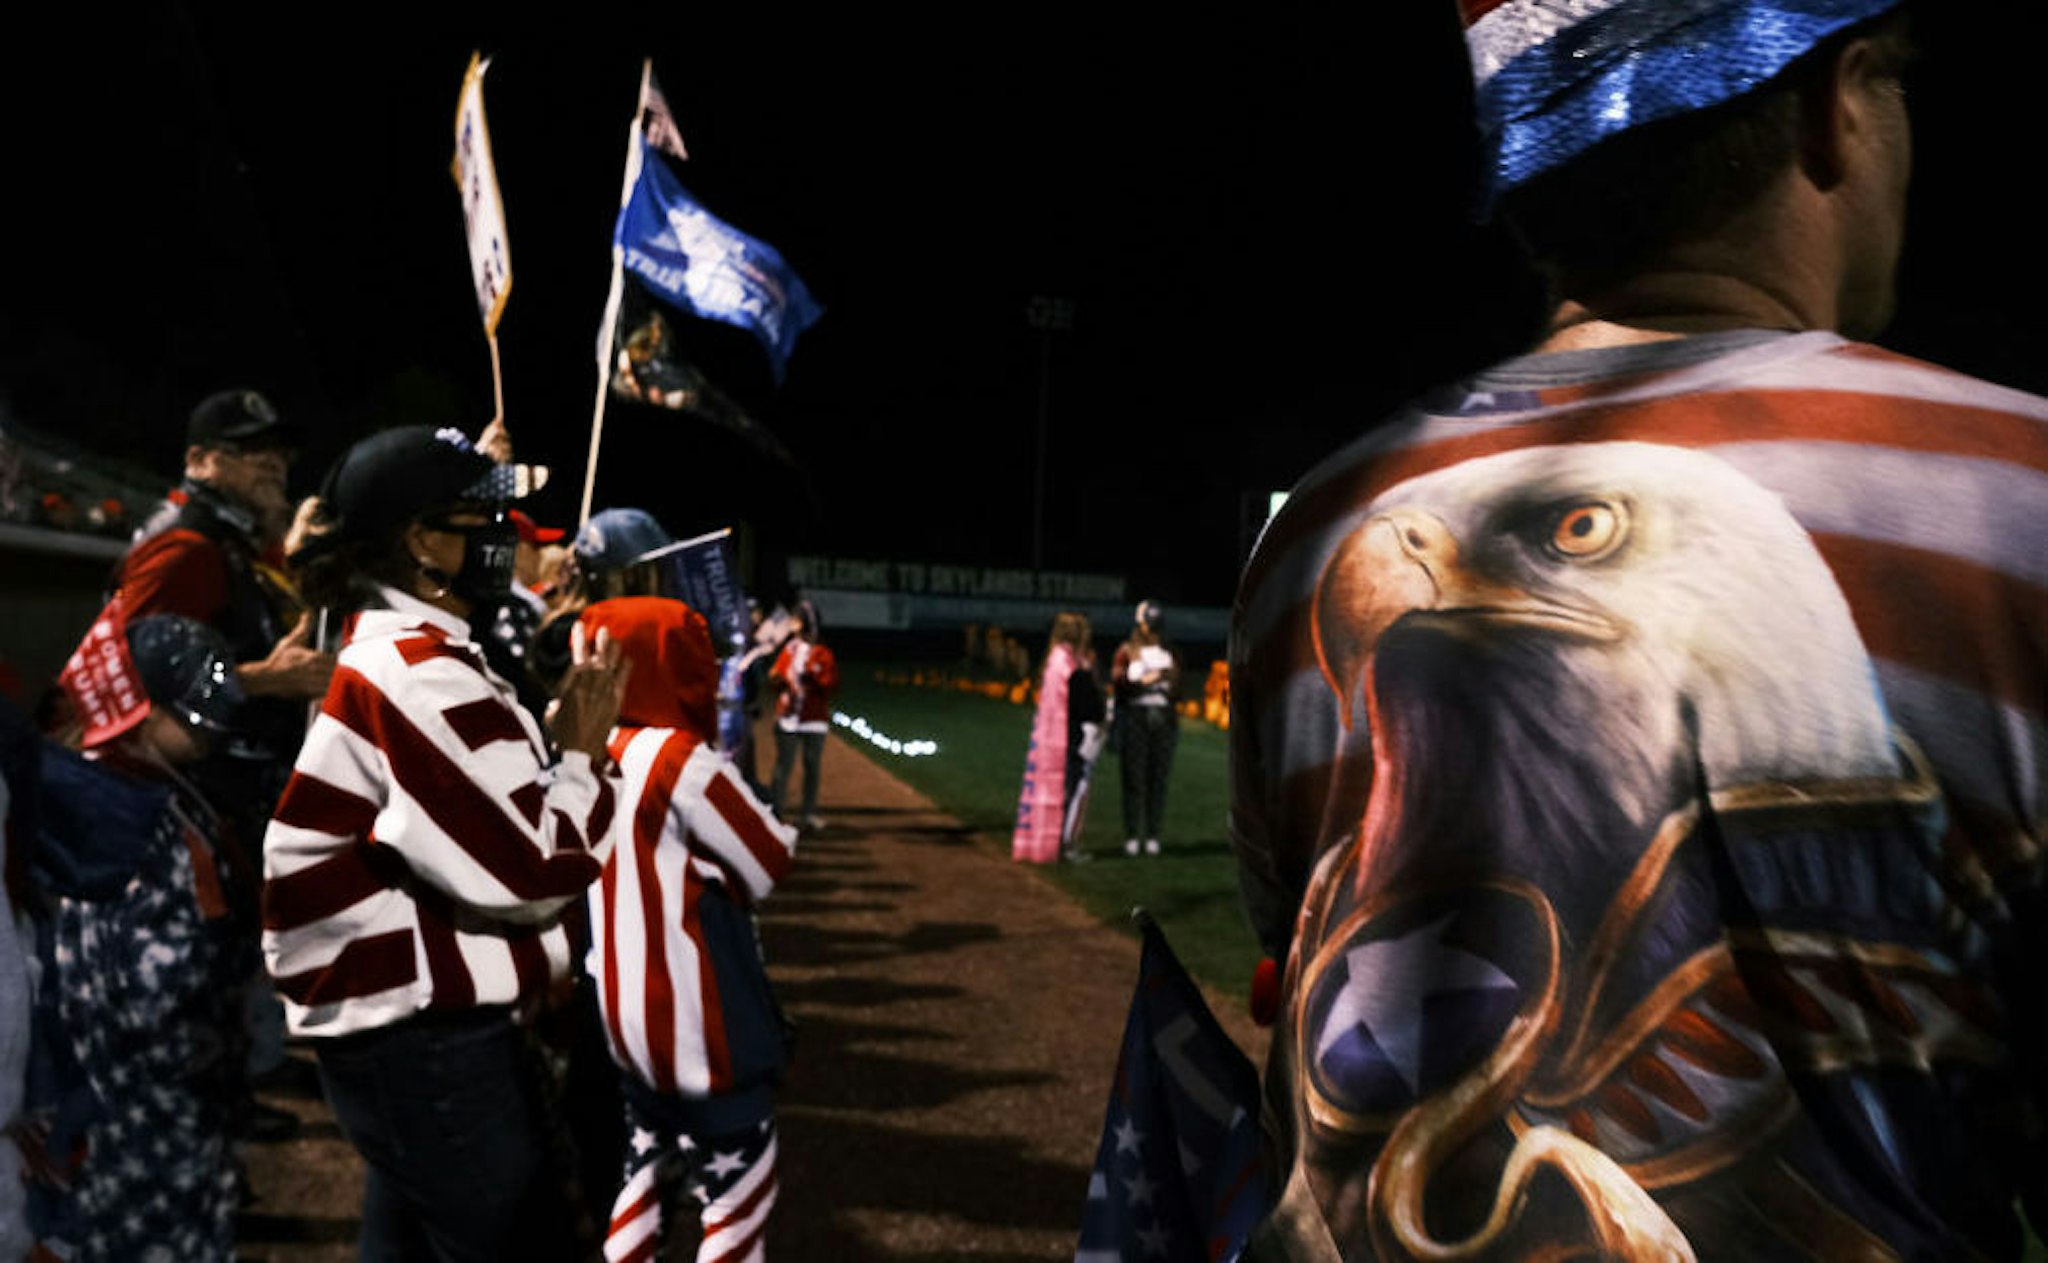 Supporters of President Donald Trump attend an election rally at Skylands Stadium on October 14, 2020 in Augusta, New Jersey. Billed as “the largest grassroots presidential election rally to date,” the event featured numerous speakers urging New Jersey residents to re-elect Donald Trump for president on November 4th. New Jersey, which has a Democratic governor, is expected to be won by Democratic challenger Joe Biden. (Photo by Spencer Platt/Getty Images)